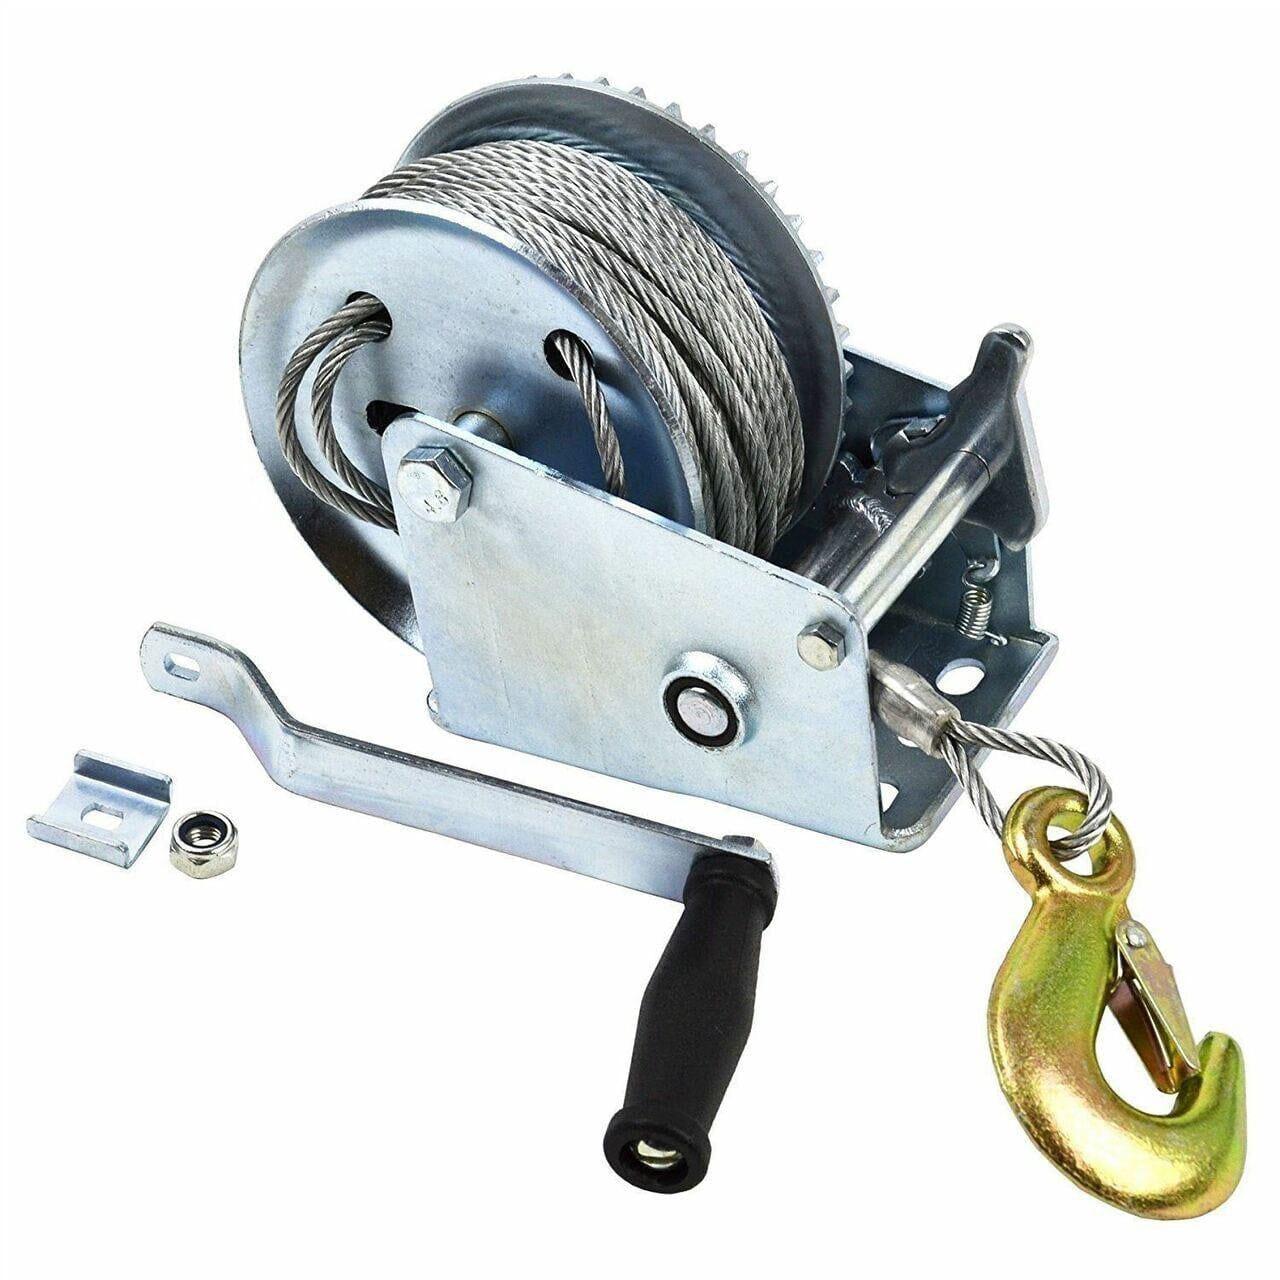 1200 lbs H/DUTY Hand Gear Winch 20m Cable For Car/Boat/Trailer etc TD023 - Tools 2U Direct SW